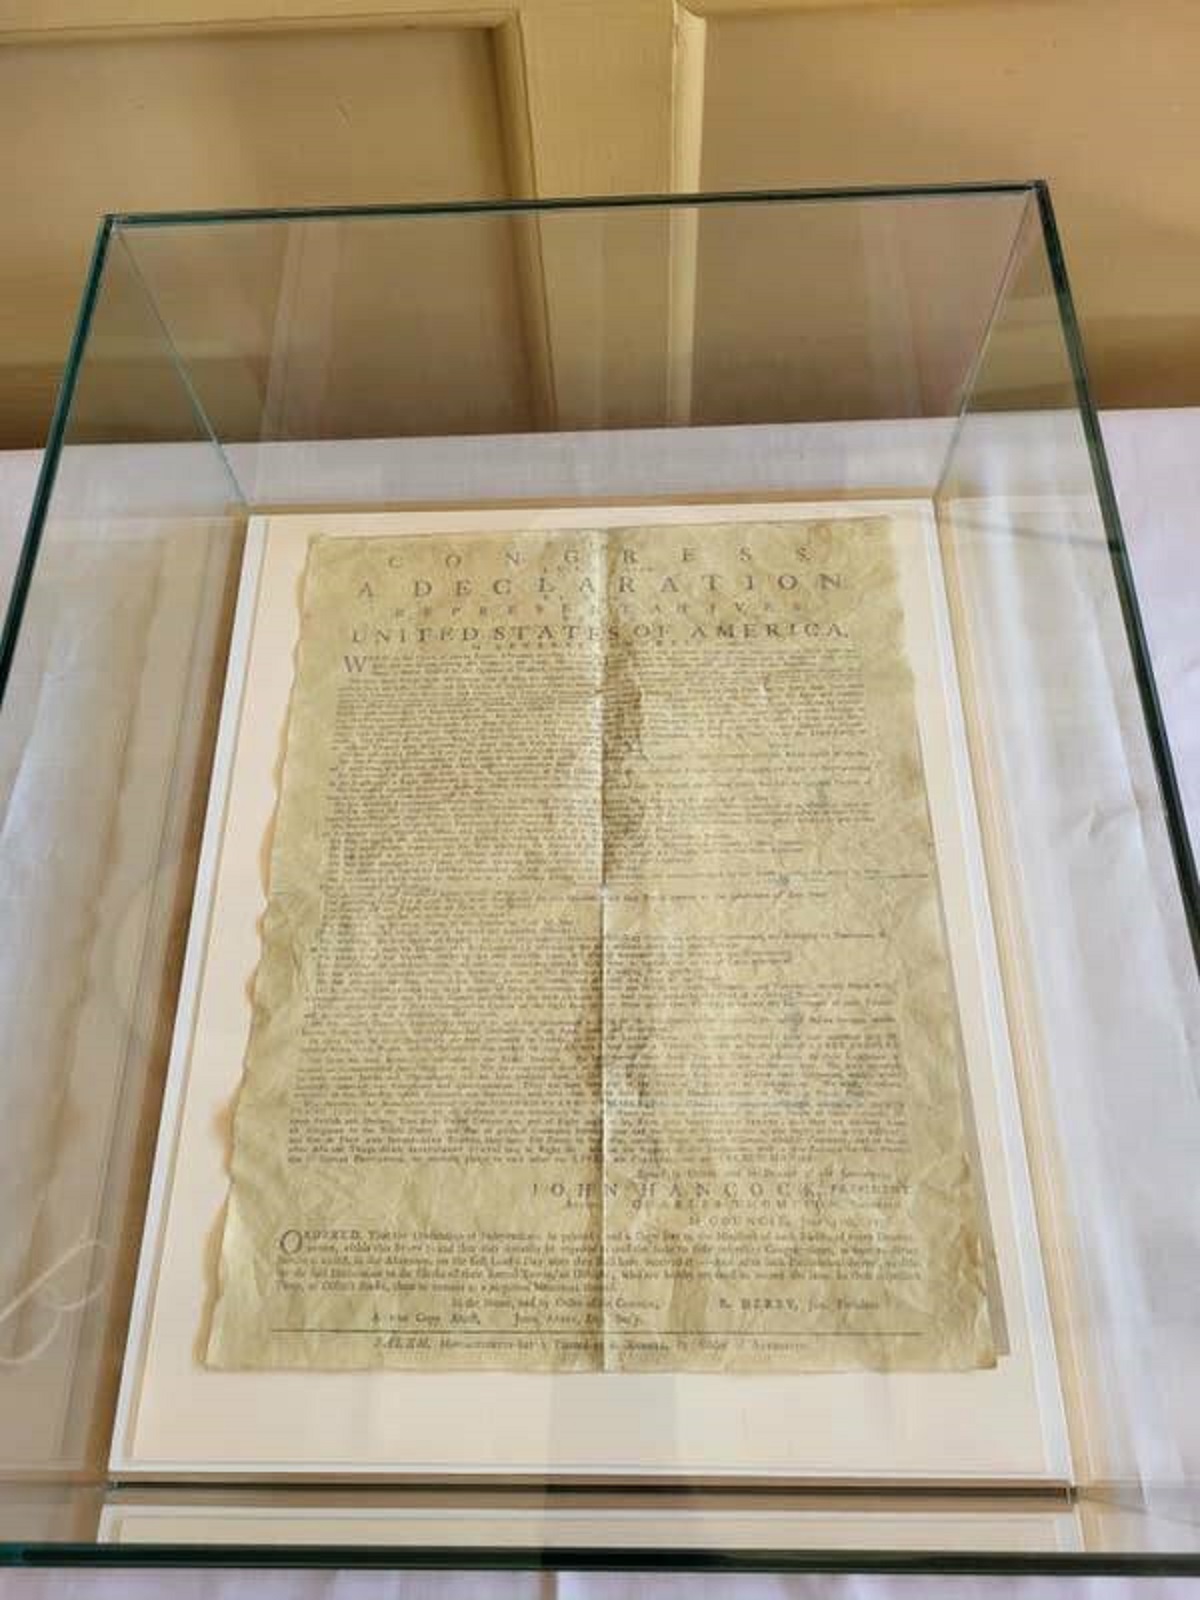 real declaration of independence on display - S A Declaration United States Of America. W John Han Faturient O Adixed Thri Copy M